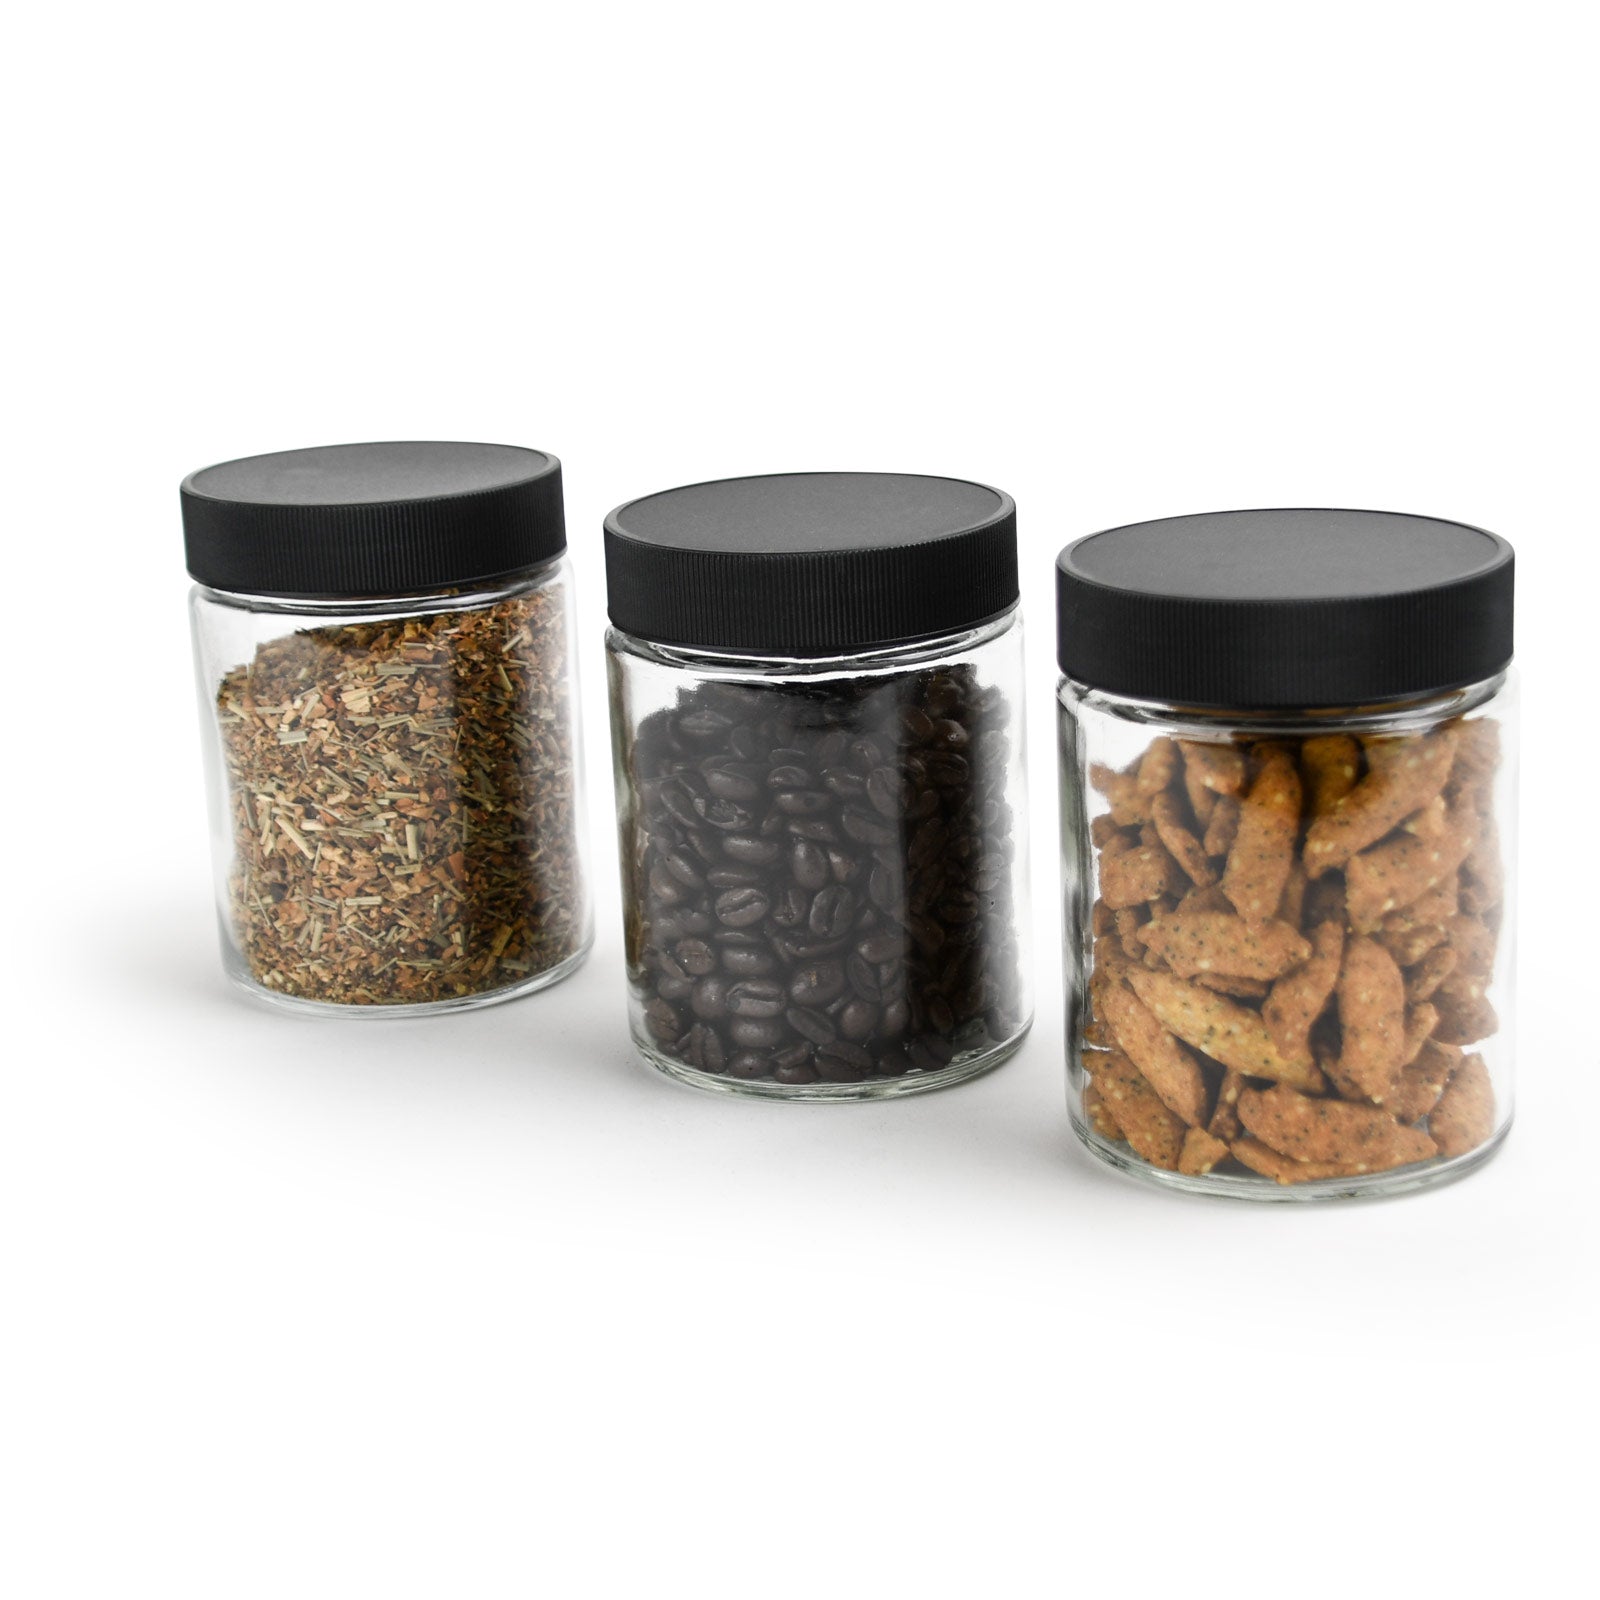 18oz Glass Jars With Black Caps - 28 Grams - 48 Count